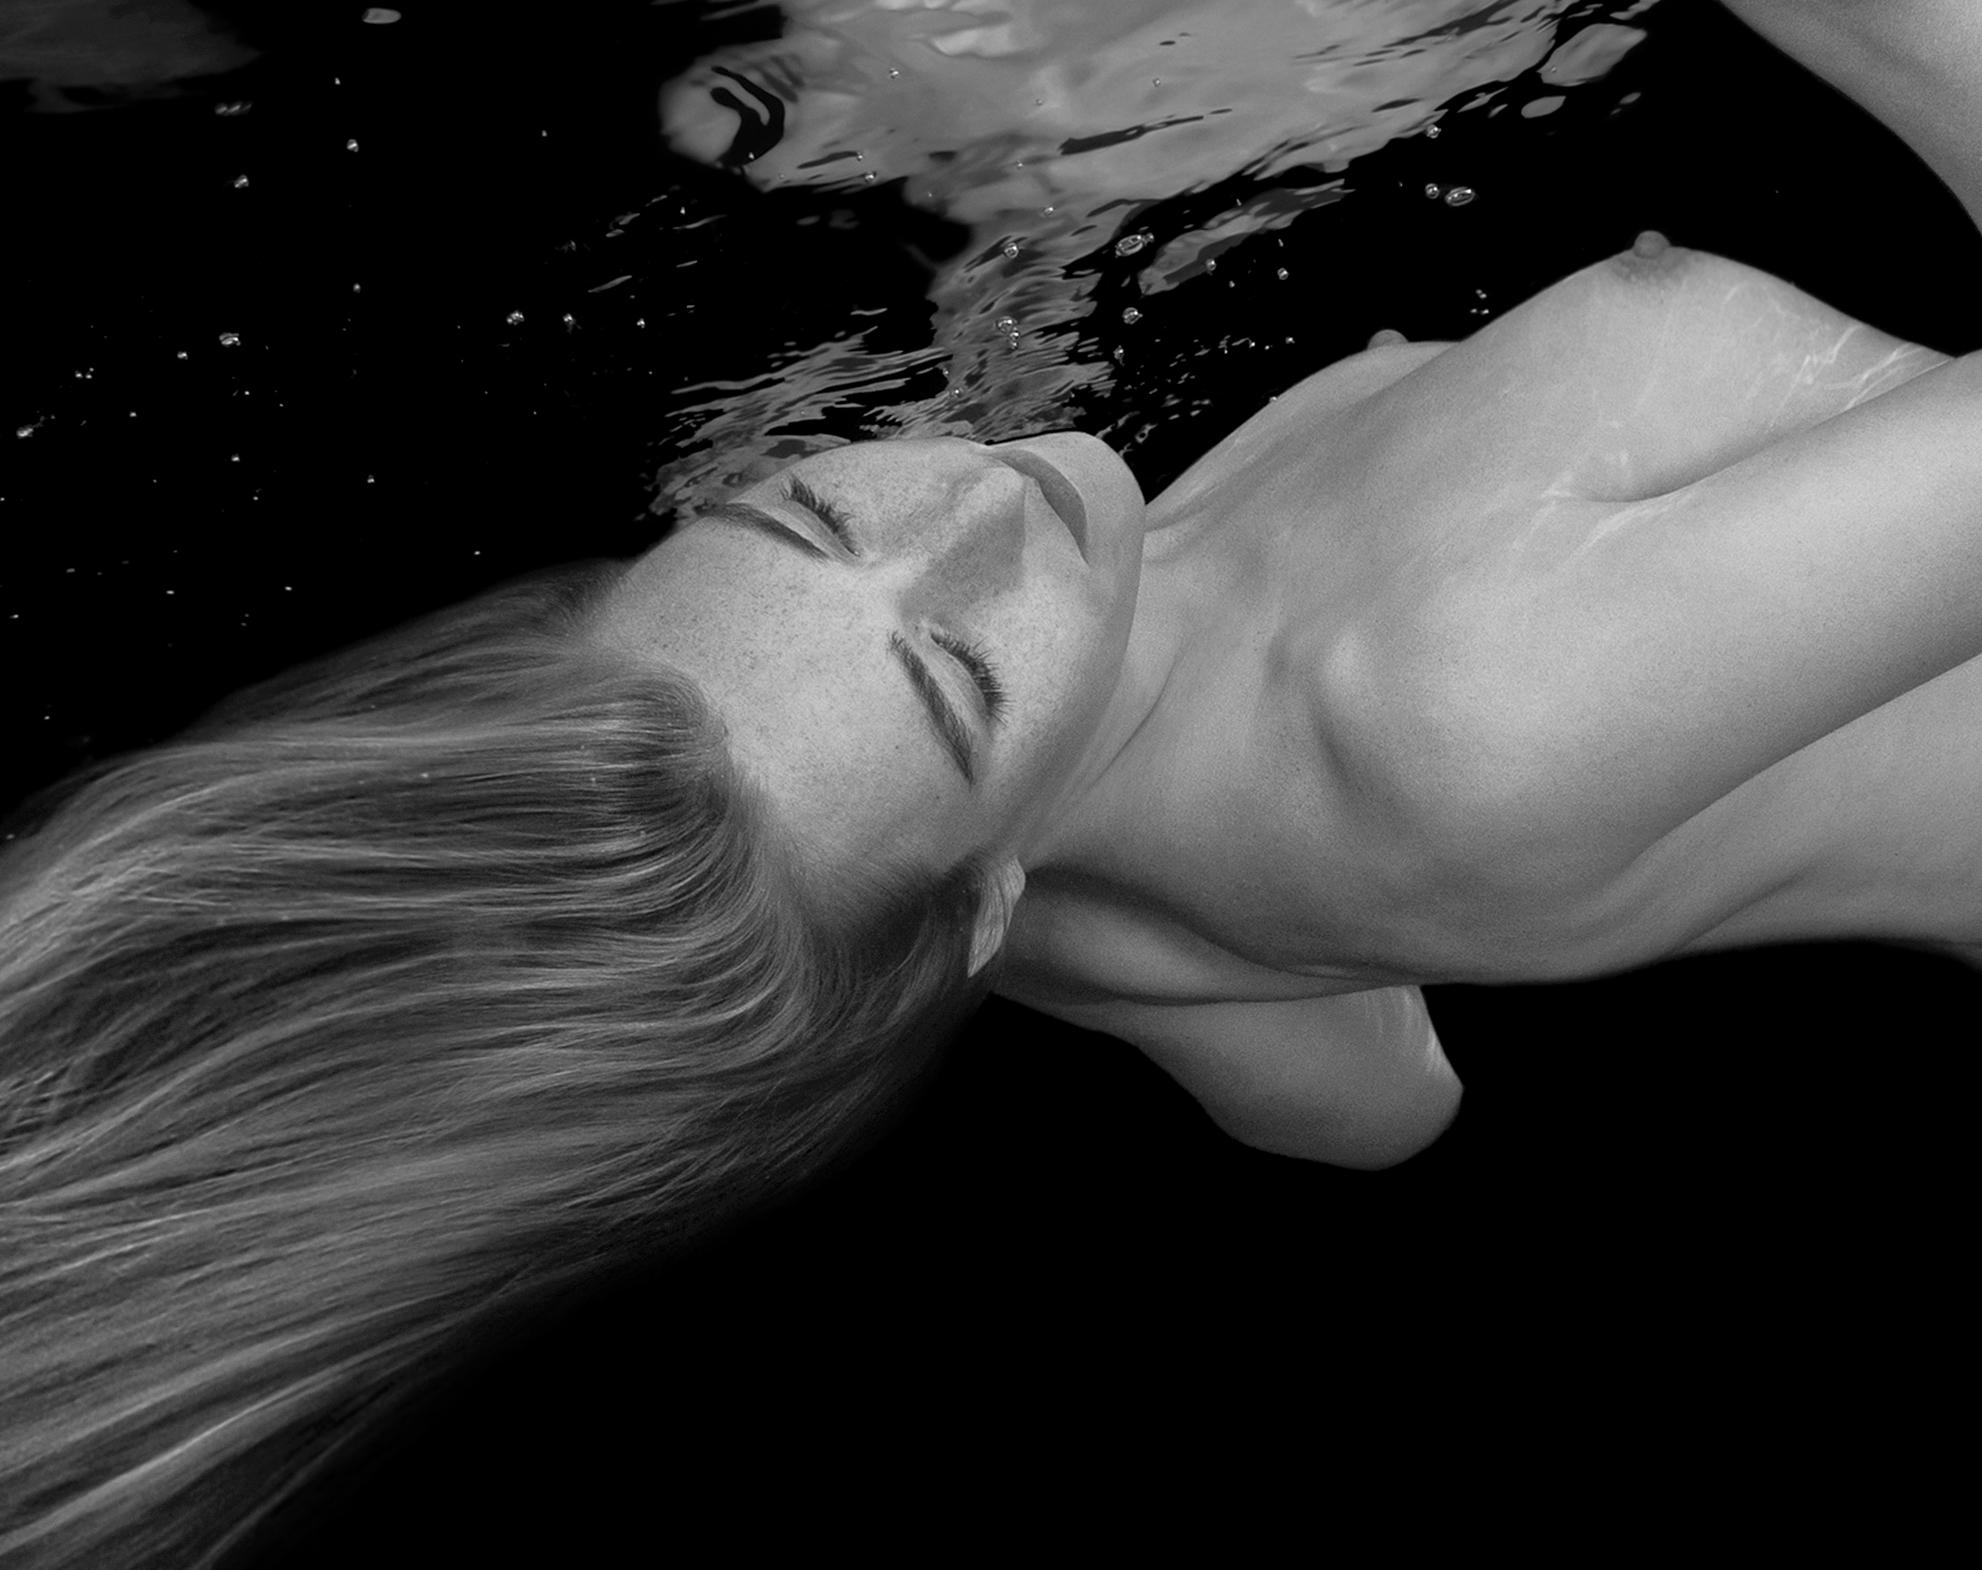 The Touch - underwater black & white nude photograph - archival pigment 18x24